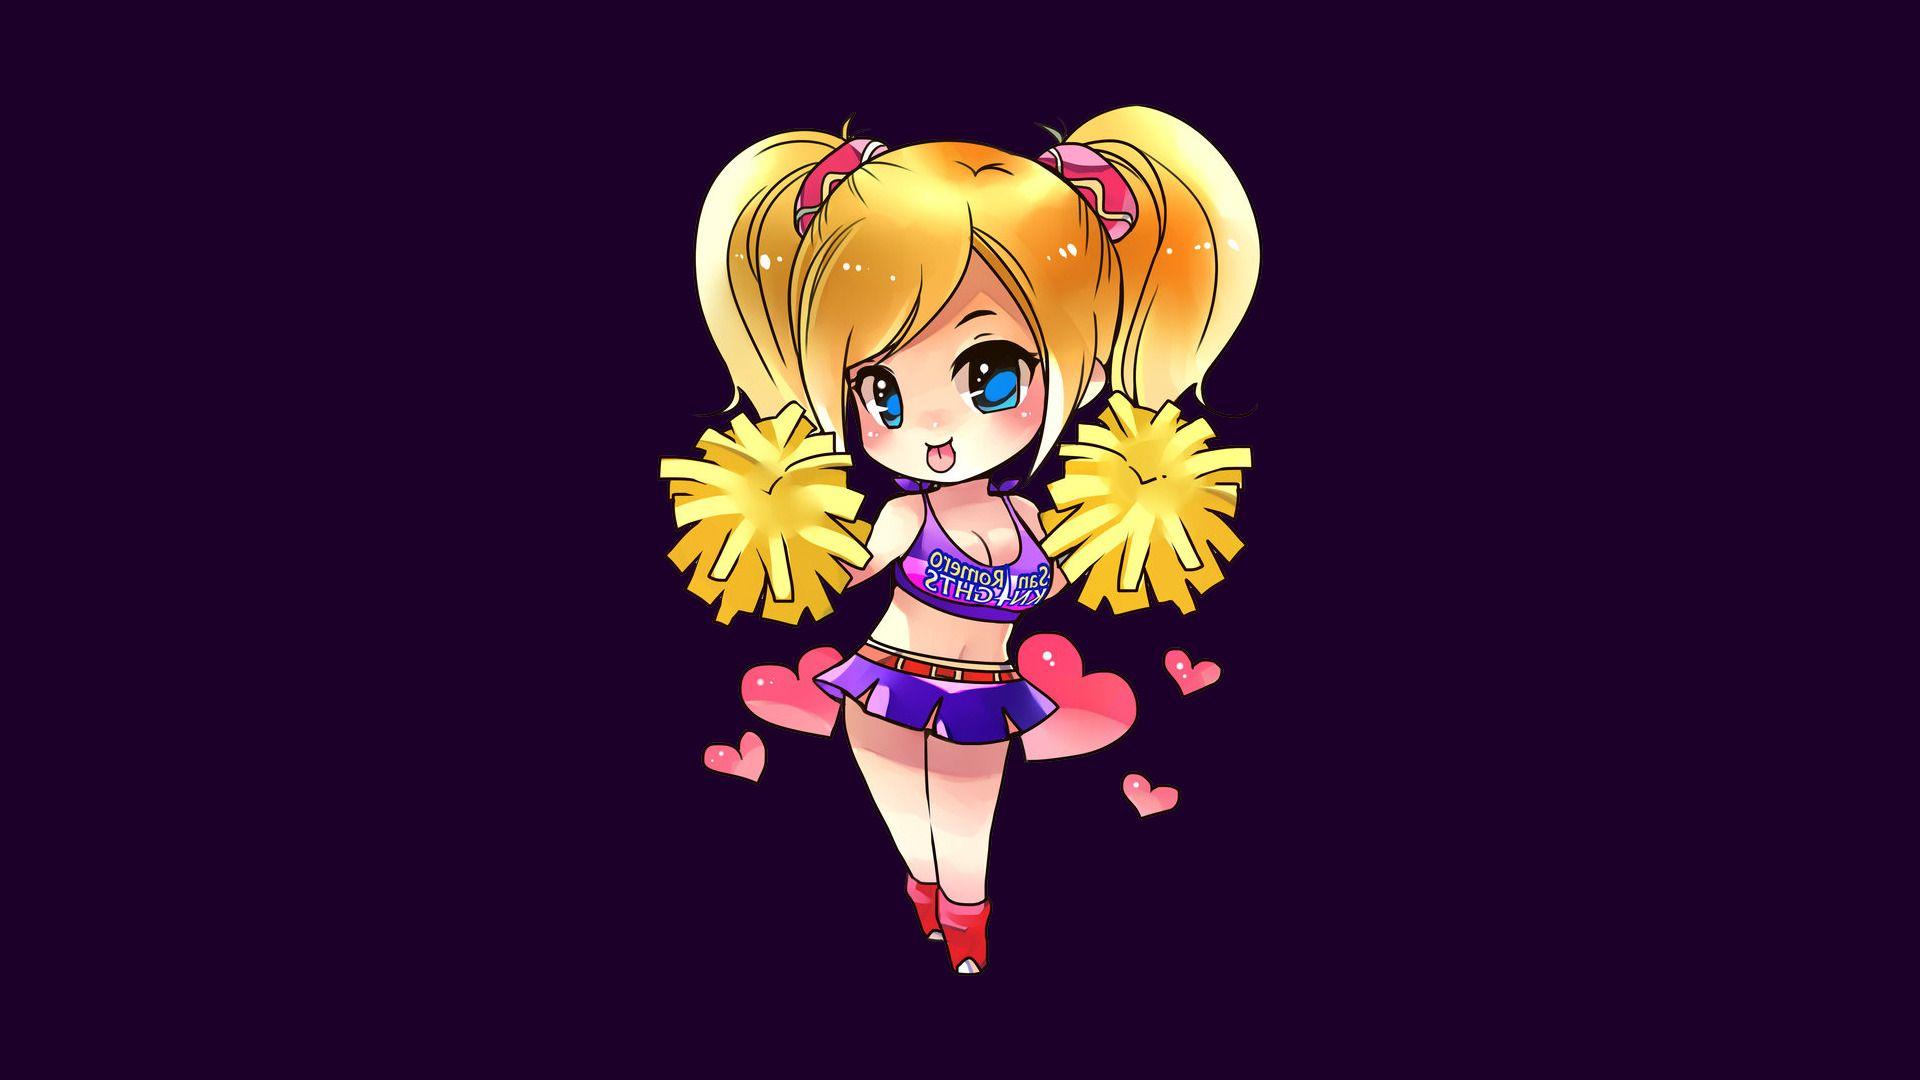 lollipop chainsaw juliet starling chibi wallpaper and background